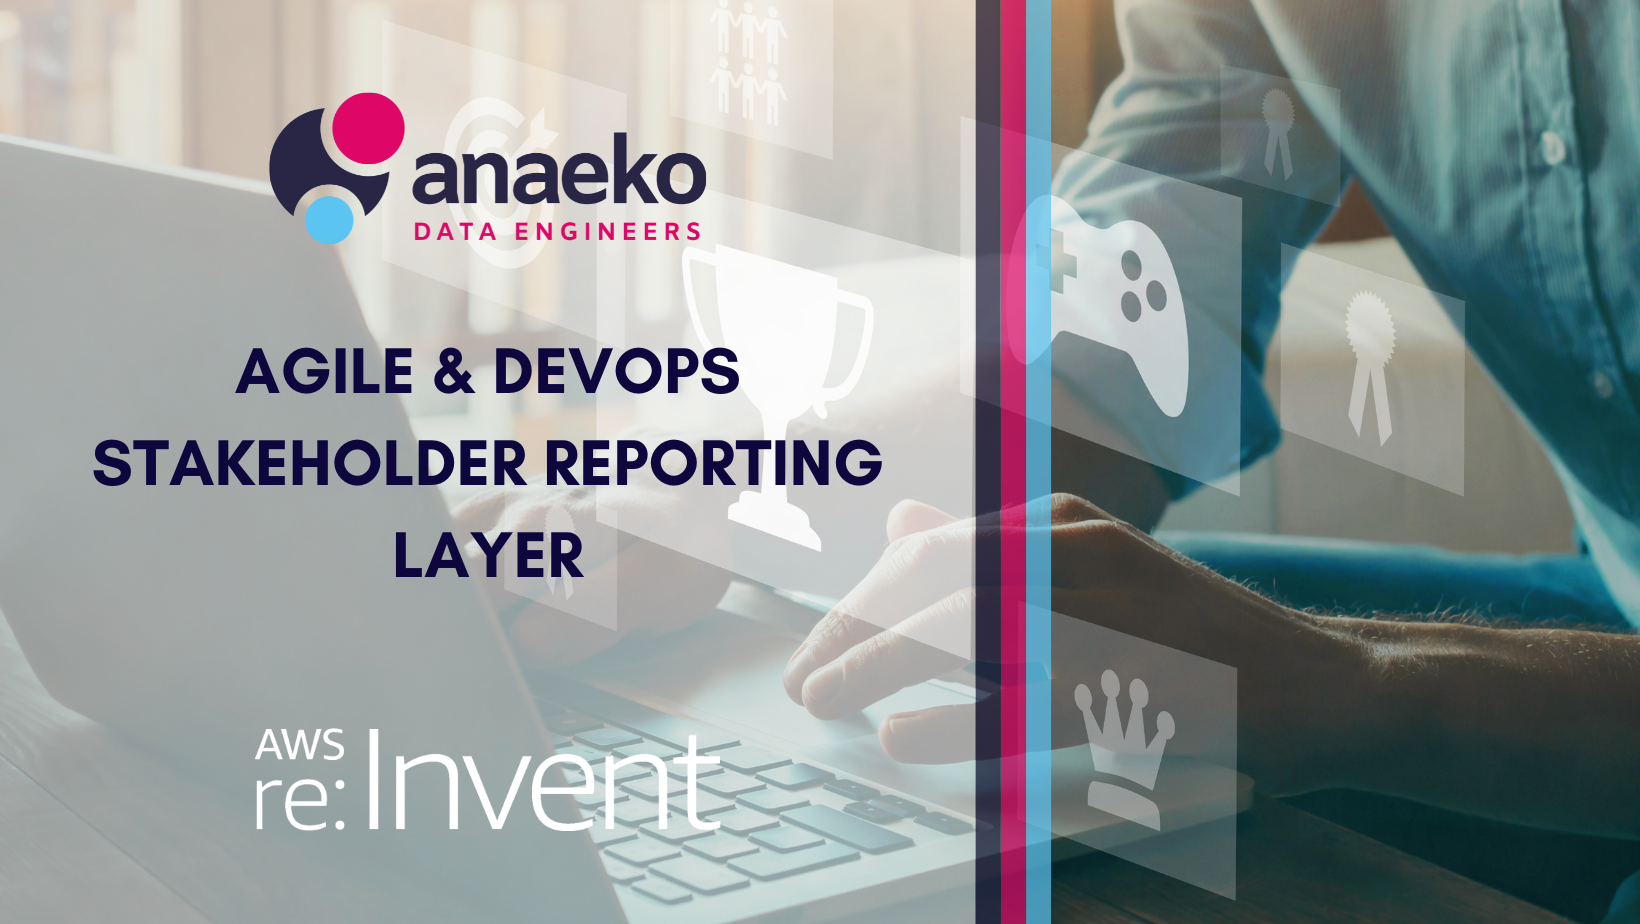 Remote Agile and DevOps Services Reporting KPIs